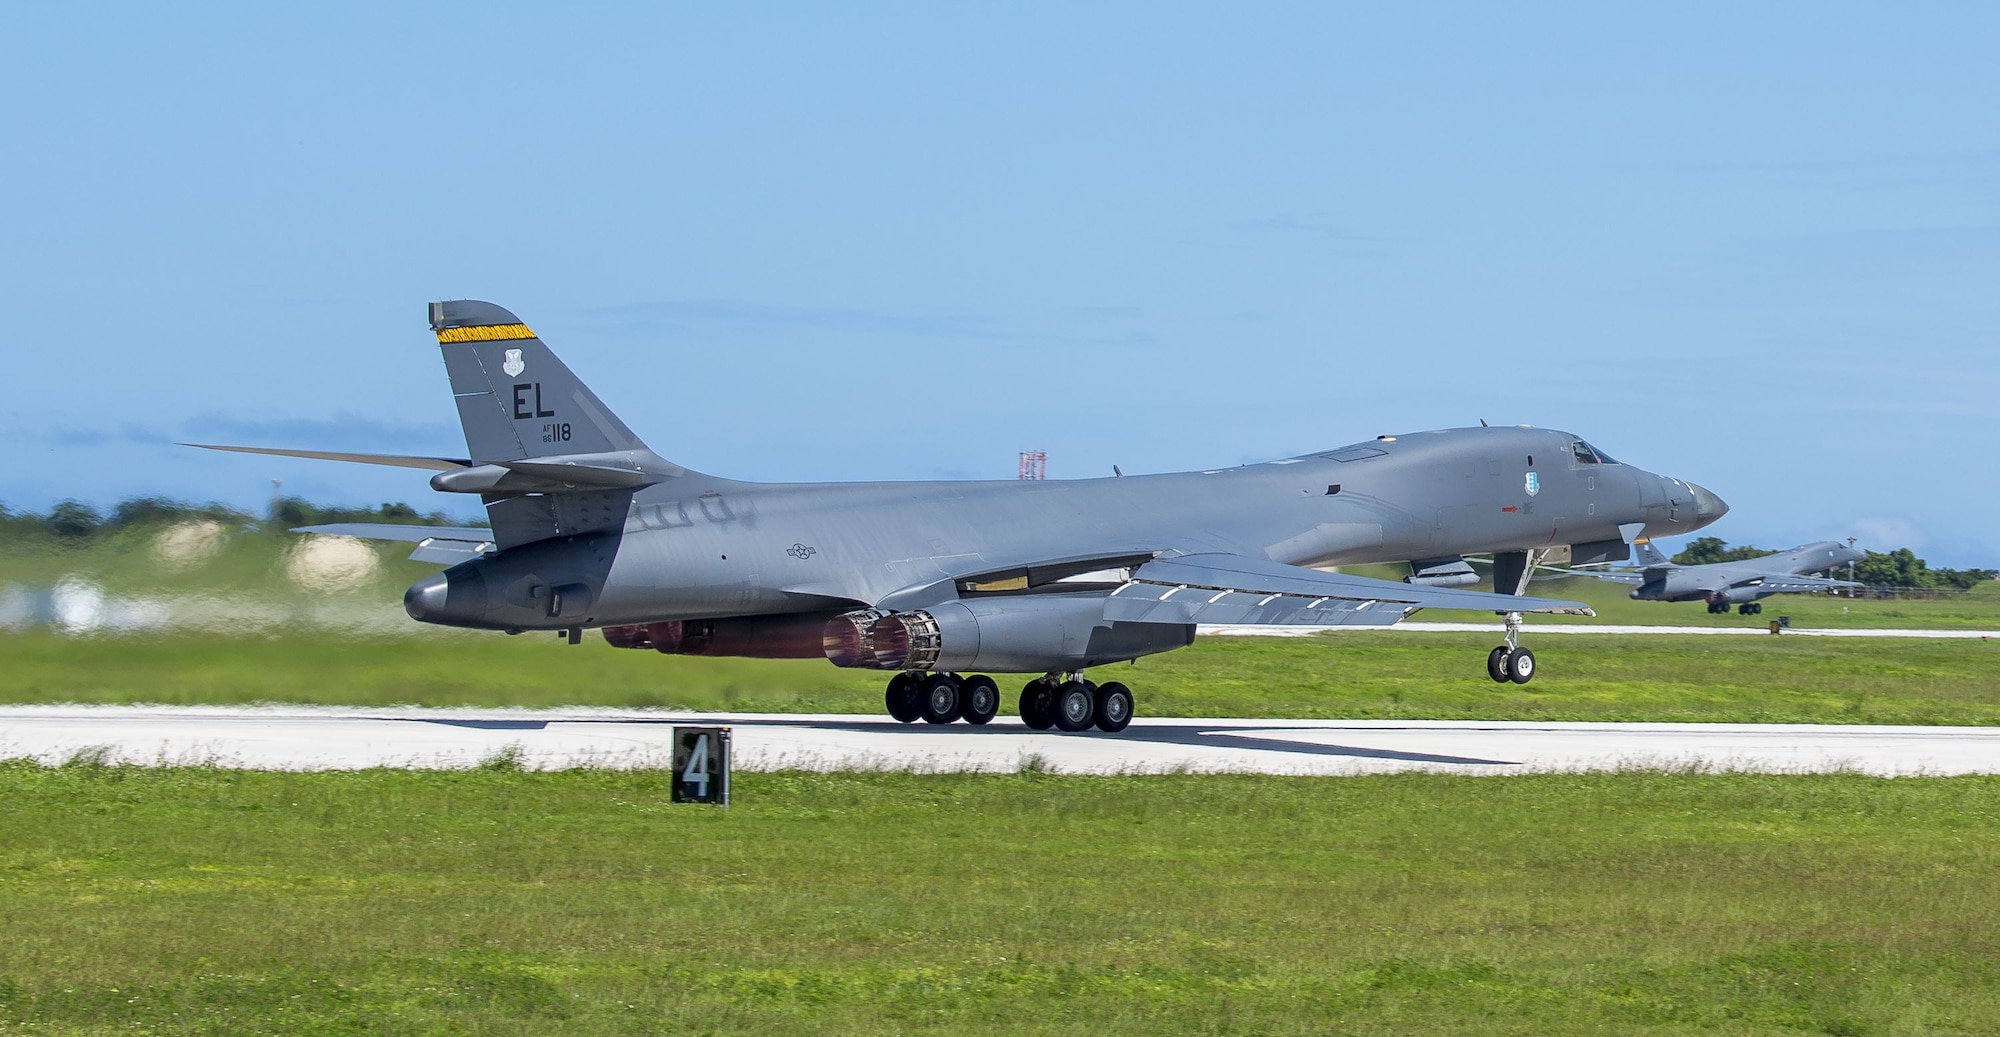 A U.S. Air Force B-1B Lancer assigned to the 37th Expeditionary Bomb Squadron, deployed from Ellsworth Air Force Base (AFB), S.D., takes off from Andersen AFB, Guam, Oct. 21, 2017. After departing from Andersen, two B-1B bombers conducted an 11-hour mission in the vicinity of the Korean Peninsula and Japan. The mission included sequential bilateral integration with Koku Jieitai (Japan Air Self-Defense Force) and Republic of Korea air forces before continuing over land to support a flyover for the 2017 Seoul International Aerospace and Defense Exhibition (Seoul ADEX 17). (U.S. Air Force photo by Airman 1st Class Christopher Quail)